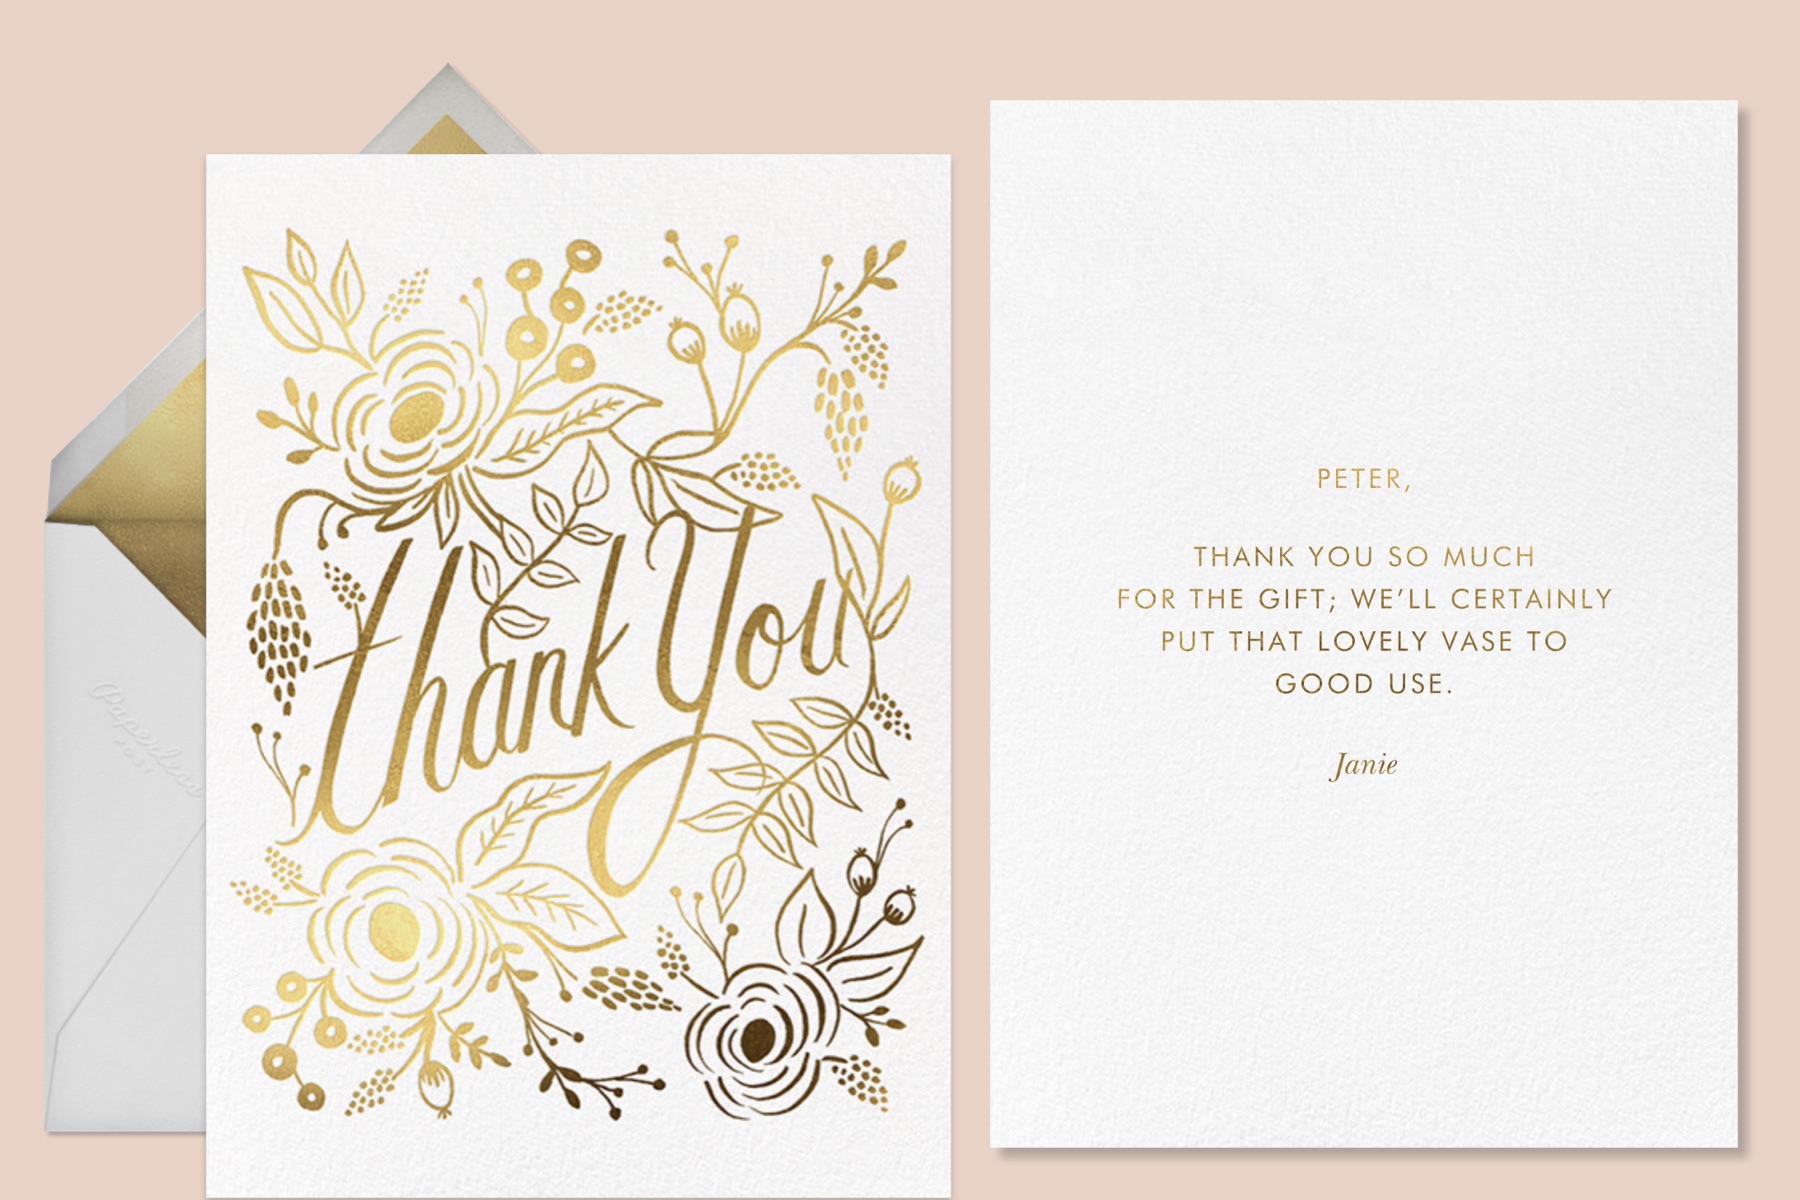 “Marion Thank You” by Rifle Paper Co. for Paperless Post